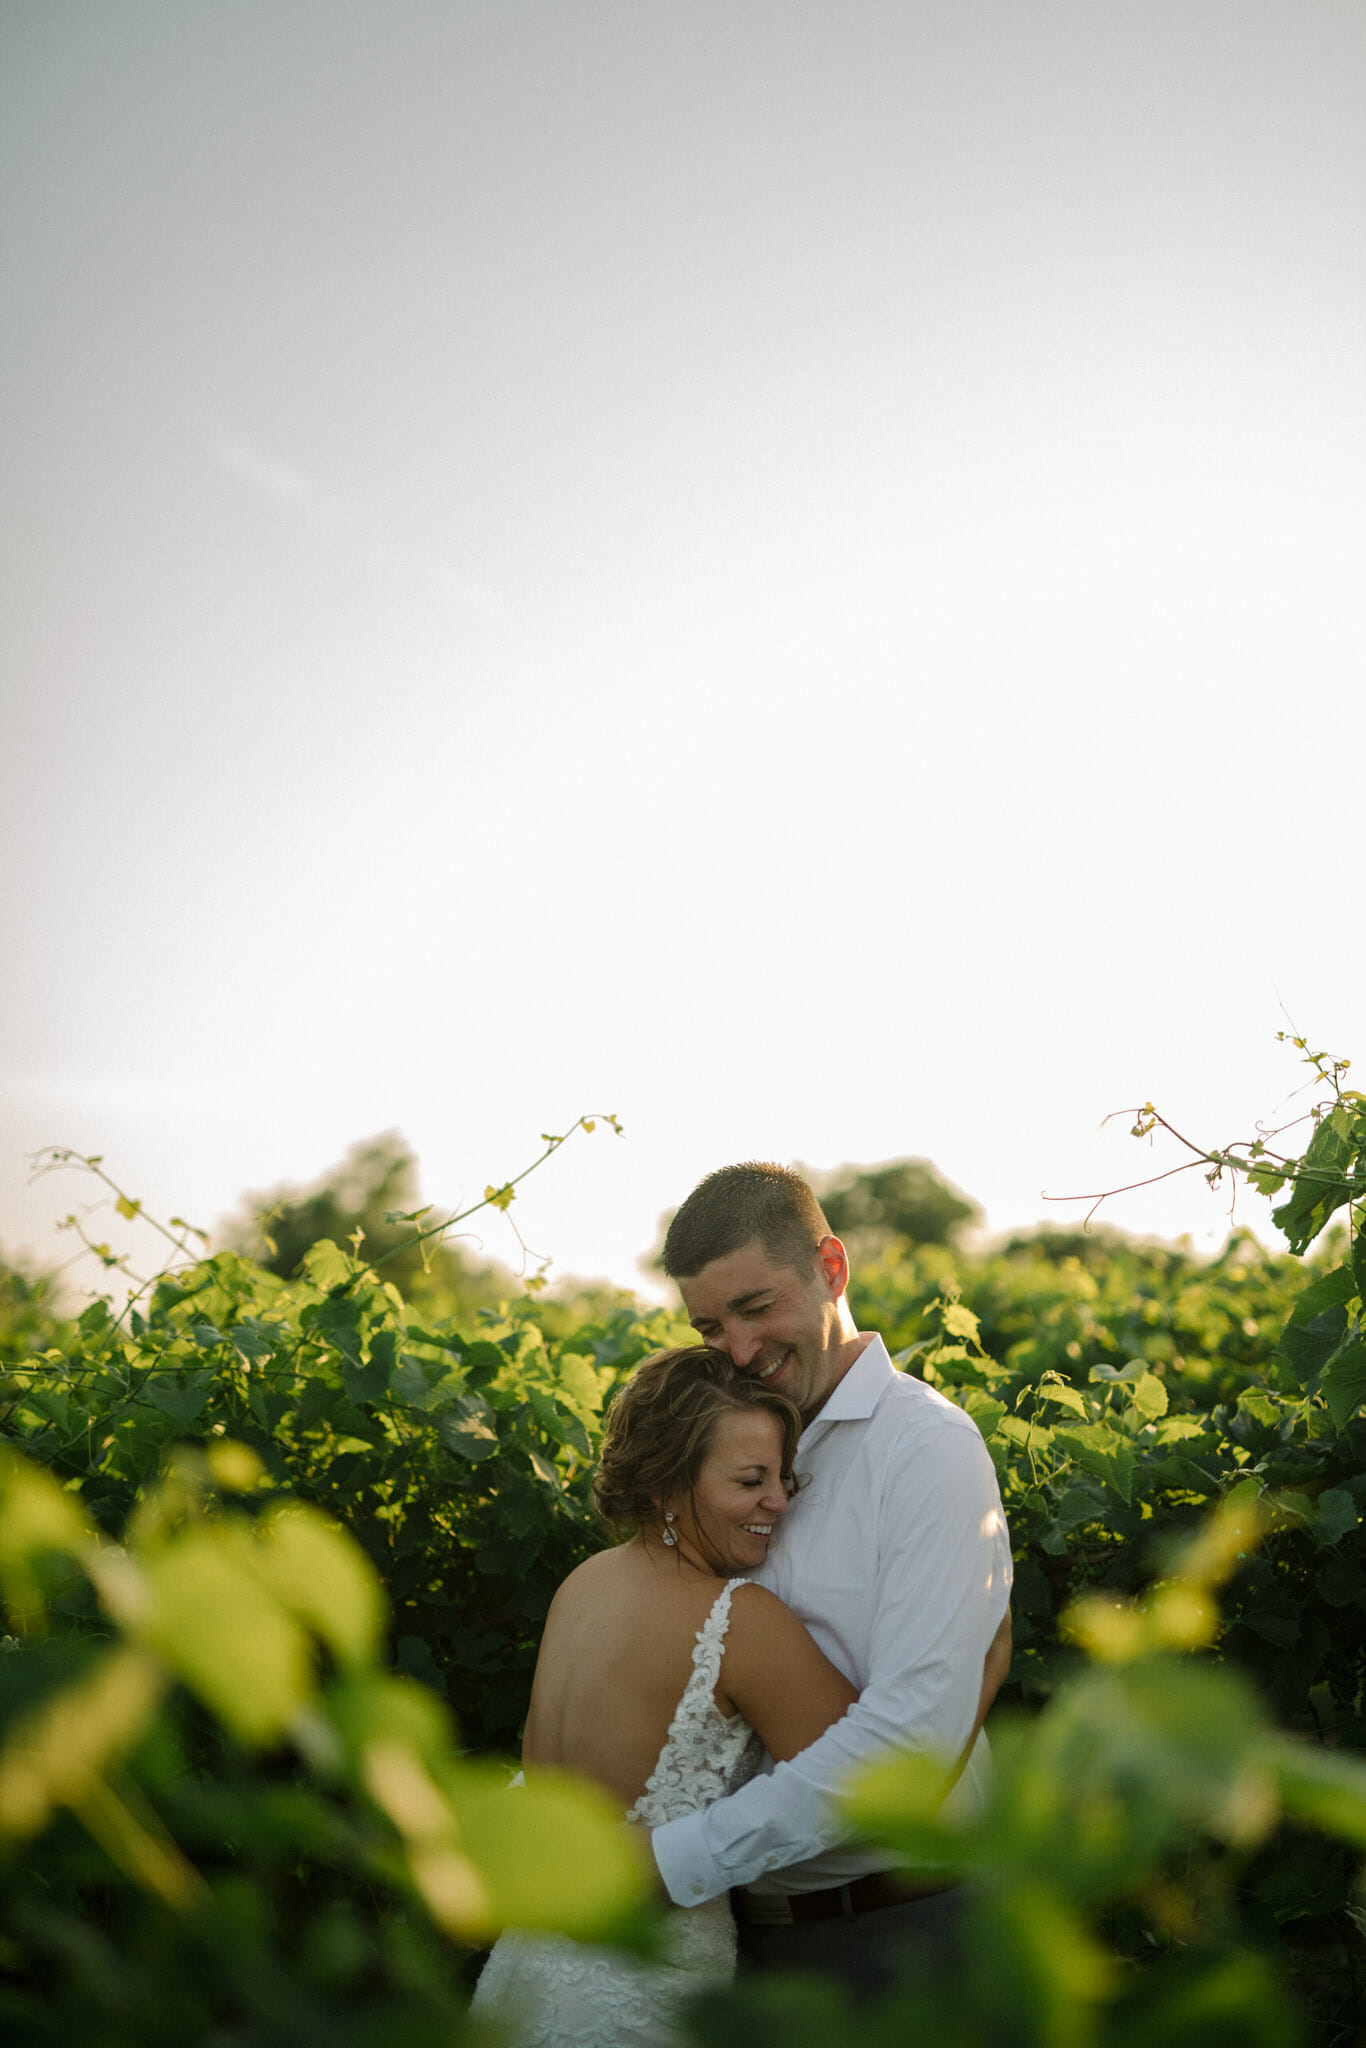 Couple hugging on wedding day in a vineyard